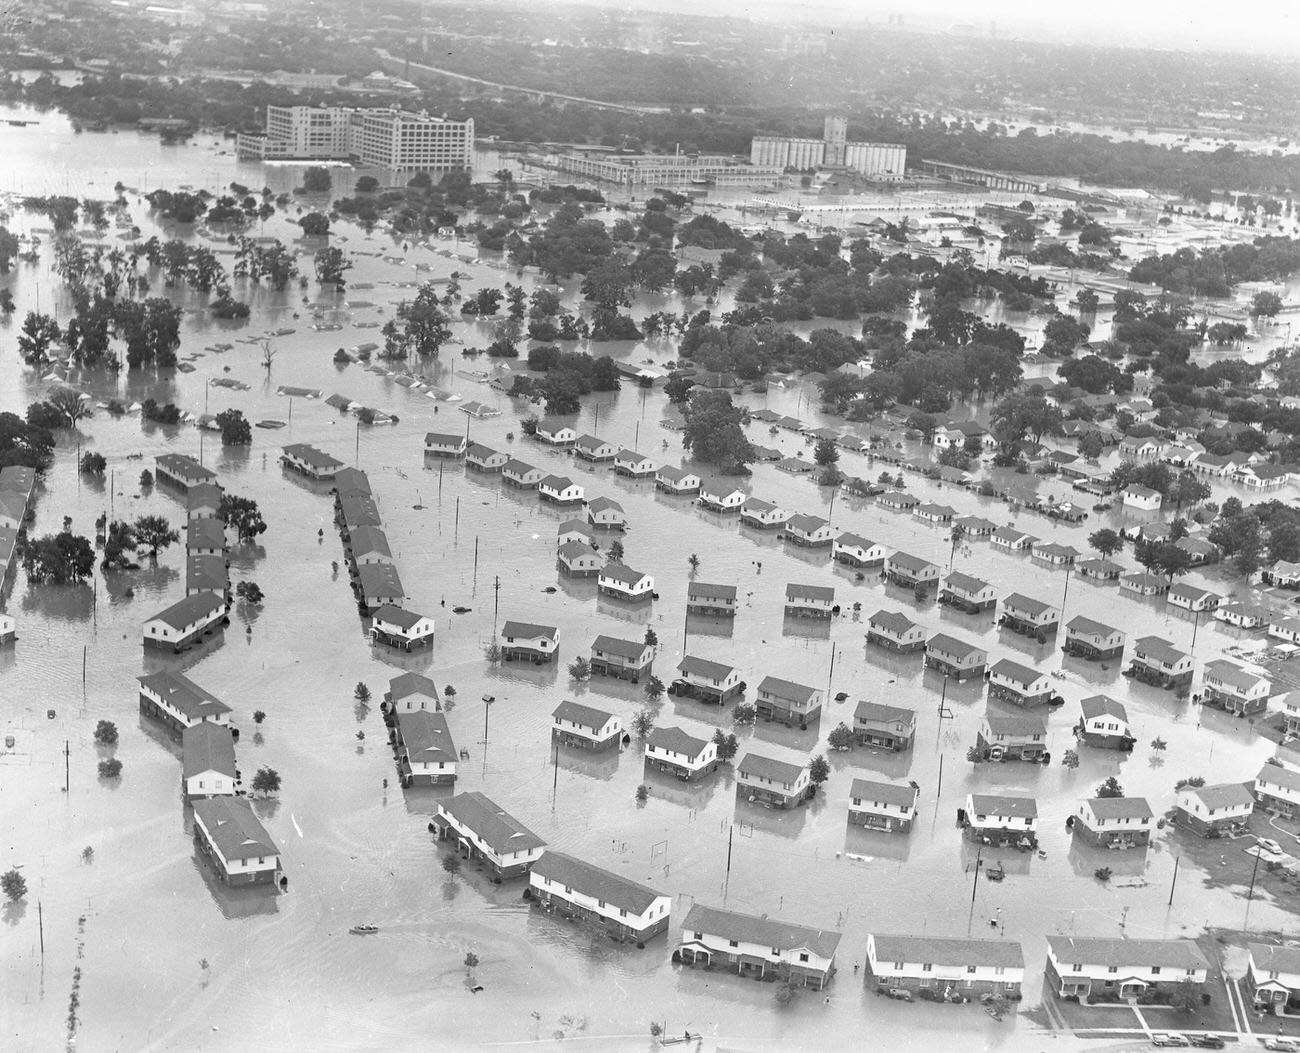 Fort Worth, Texas, flood of 1949, showing flooded homes and apartment buildings. The large Montgomery Ward building pictured in the upper left received extensive damage